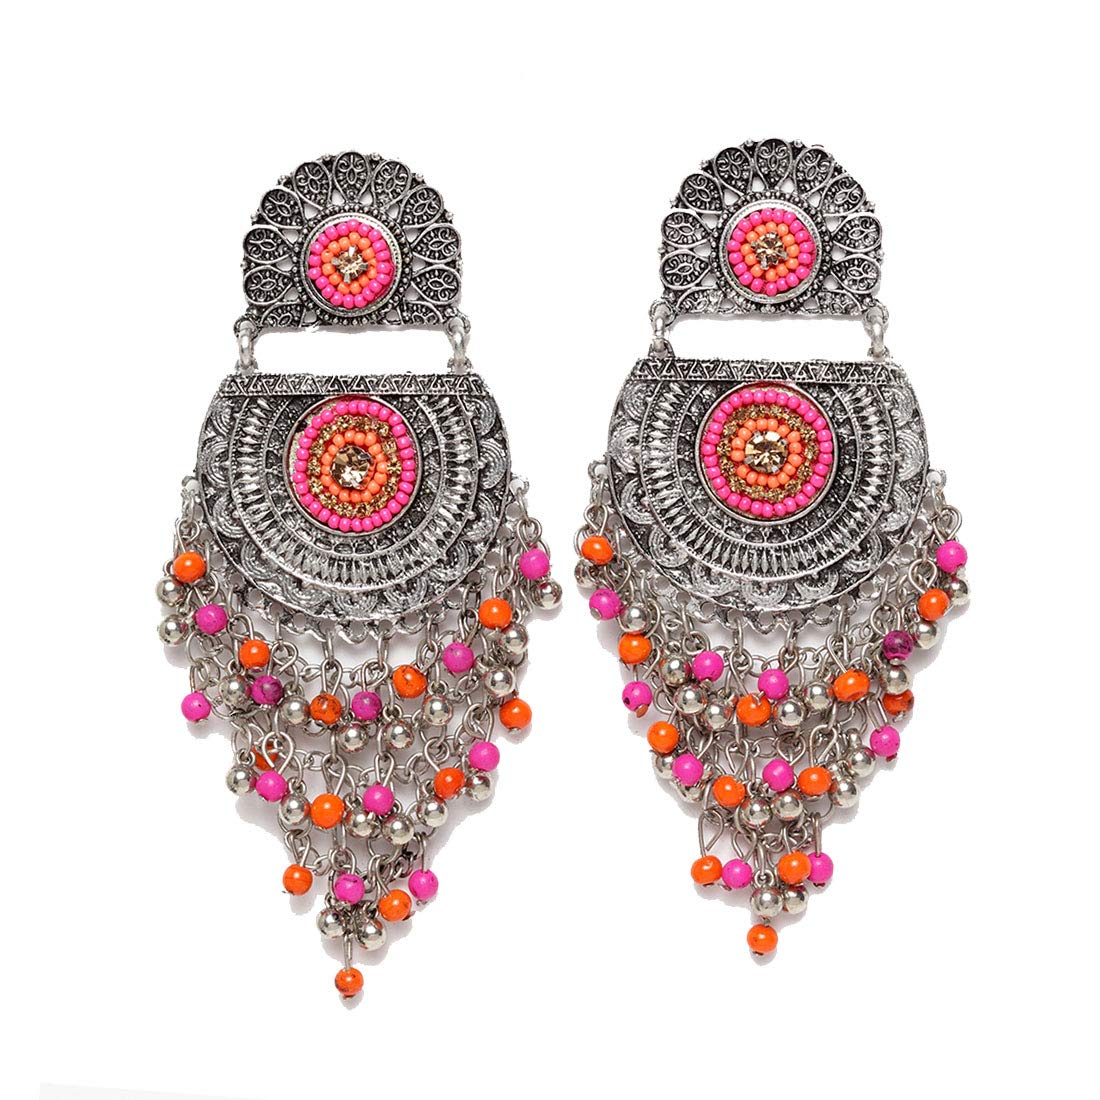 Yellow Chimes Oxidised Earrings for Women Afghani Tribal Pink Beads Oxidized Silver Traditional Chandbali Dangler Earrings for Women and Girls